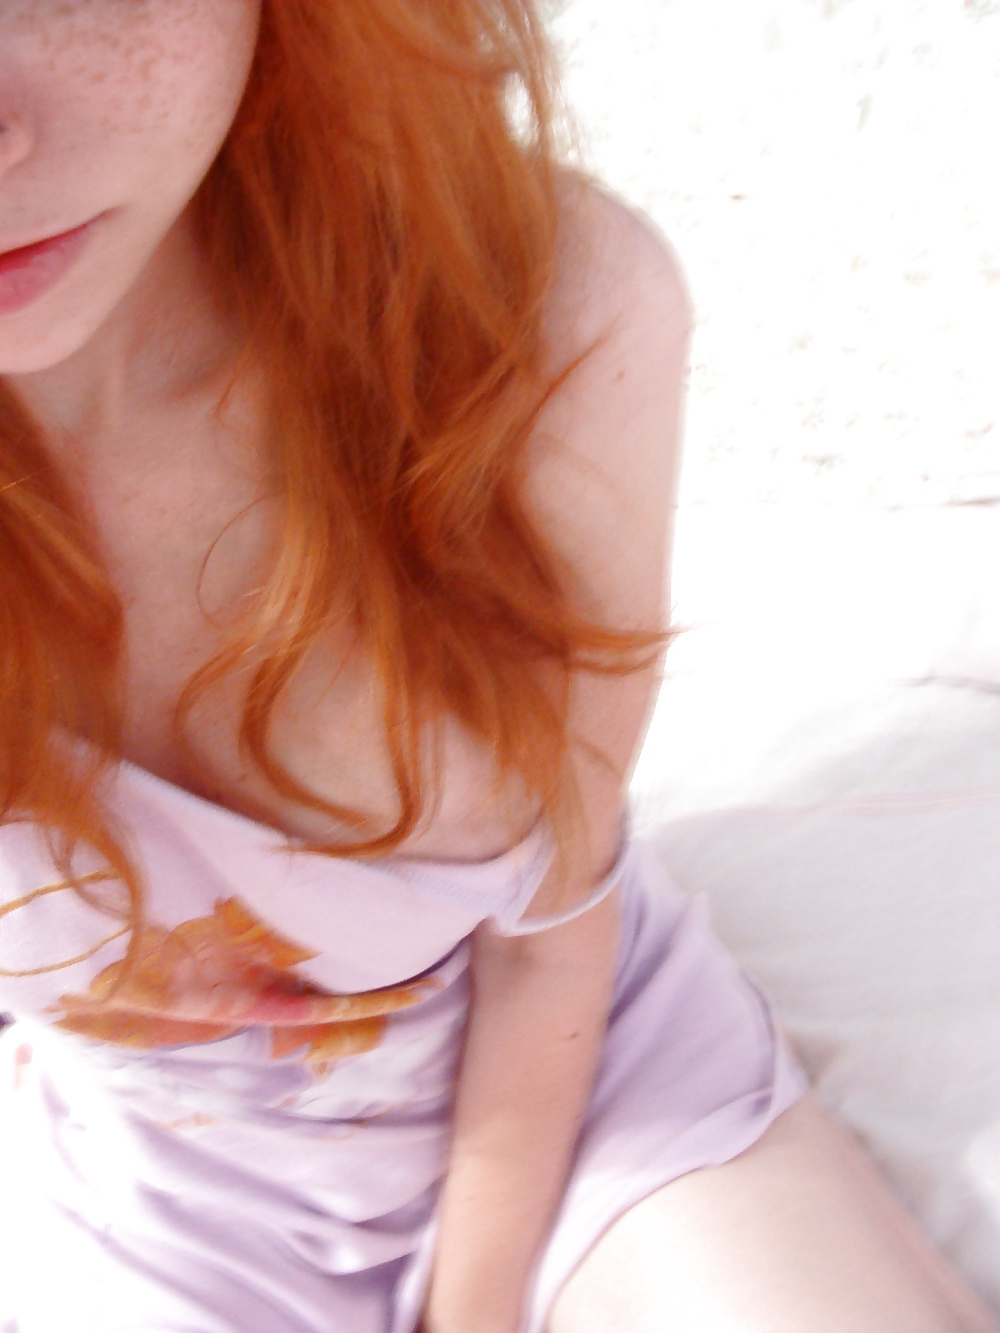 Awesome Redheads Girl With Freckles #38661030